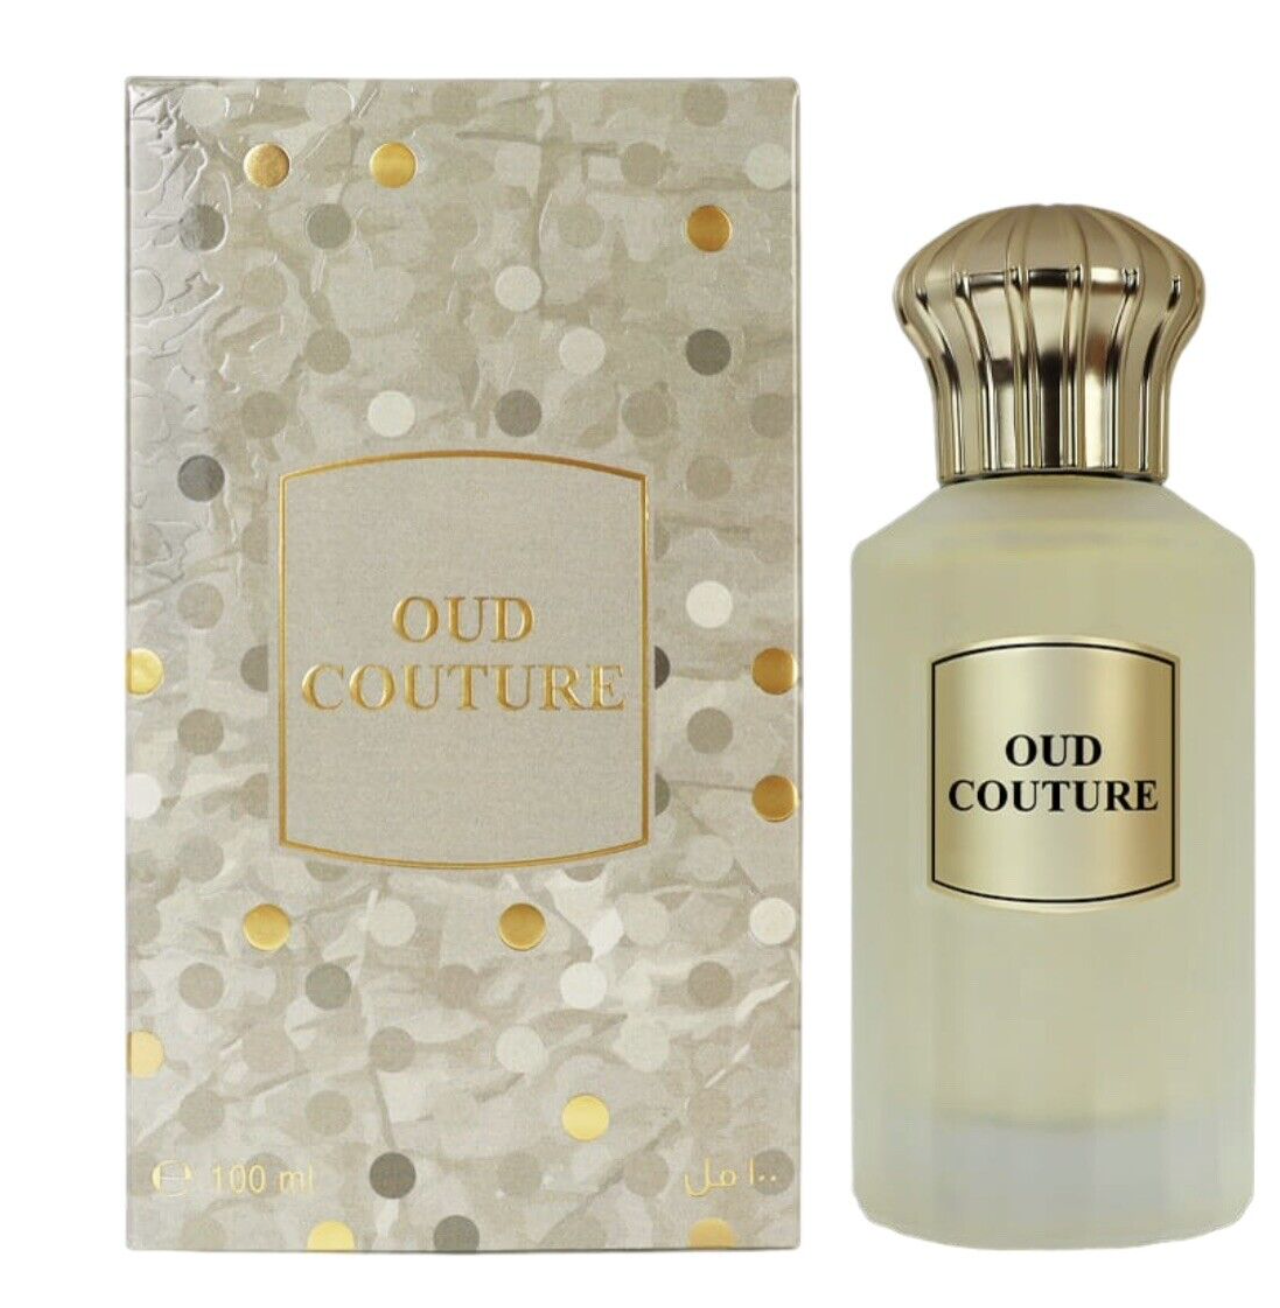 Oud Couture EDP Perfume By Ahmed Al Maghribi 100 ML - US SELLER